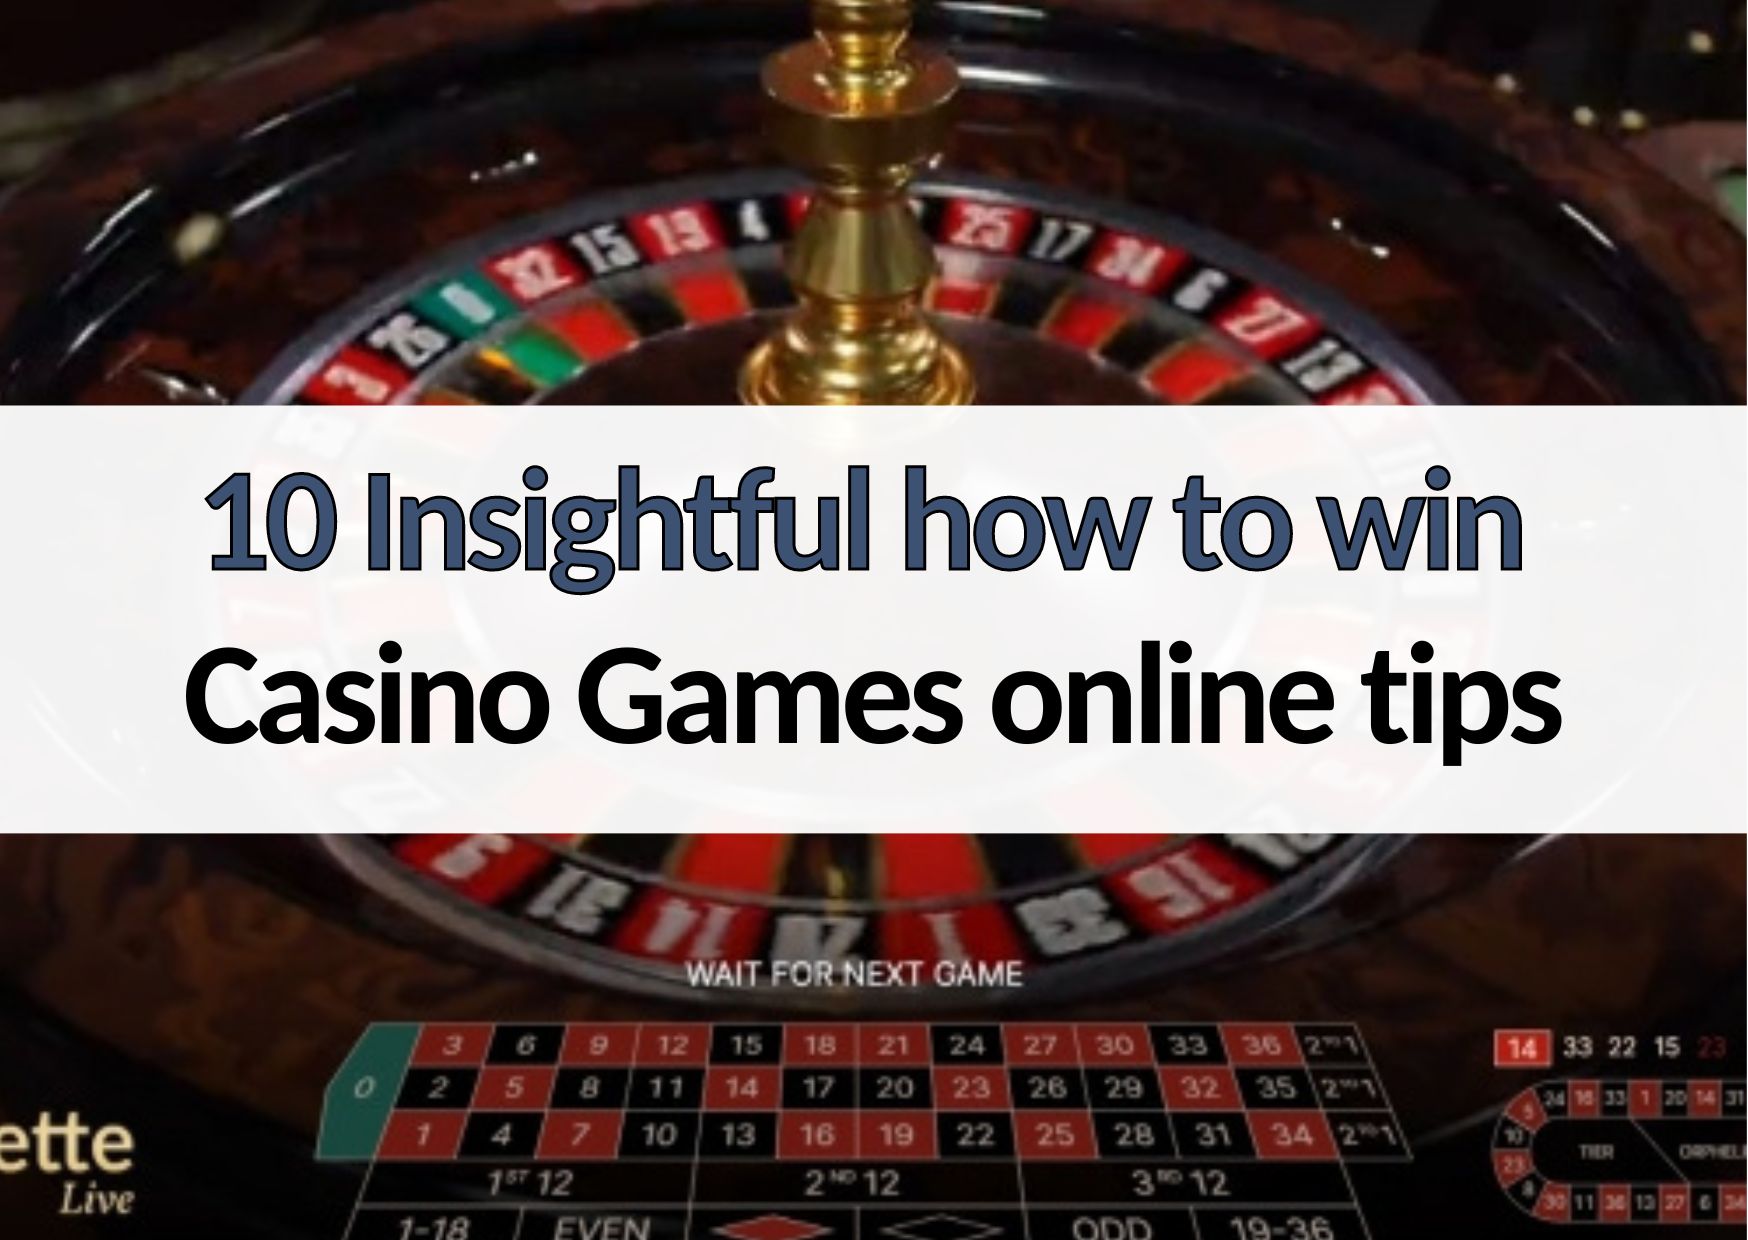 10 insightful how to win casino games online tips and tricks for beginners